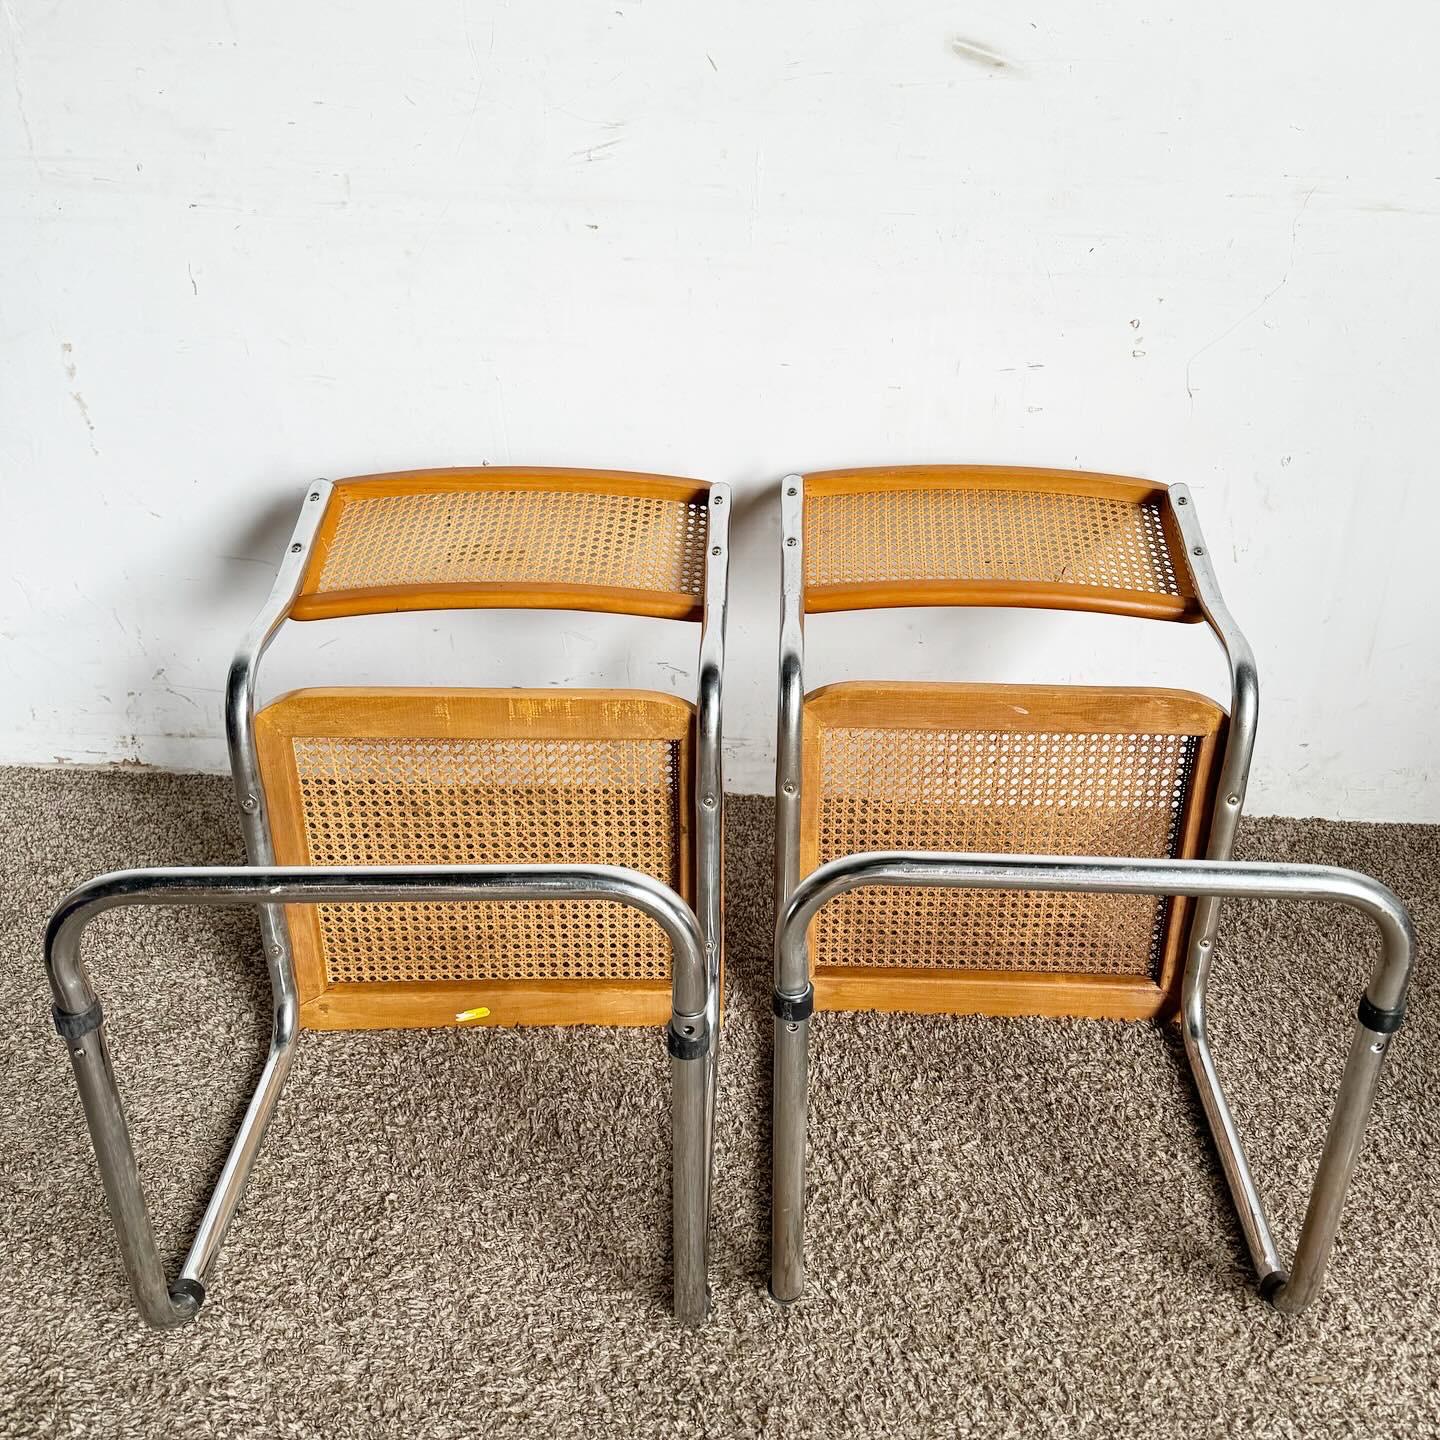 20th Century Mid Century Modern Chrome and Cane Marvel Breyer Style Cantilever Chairs For Sale